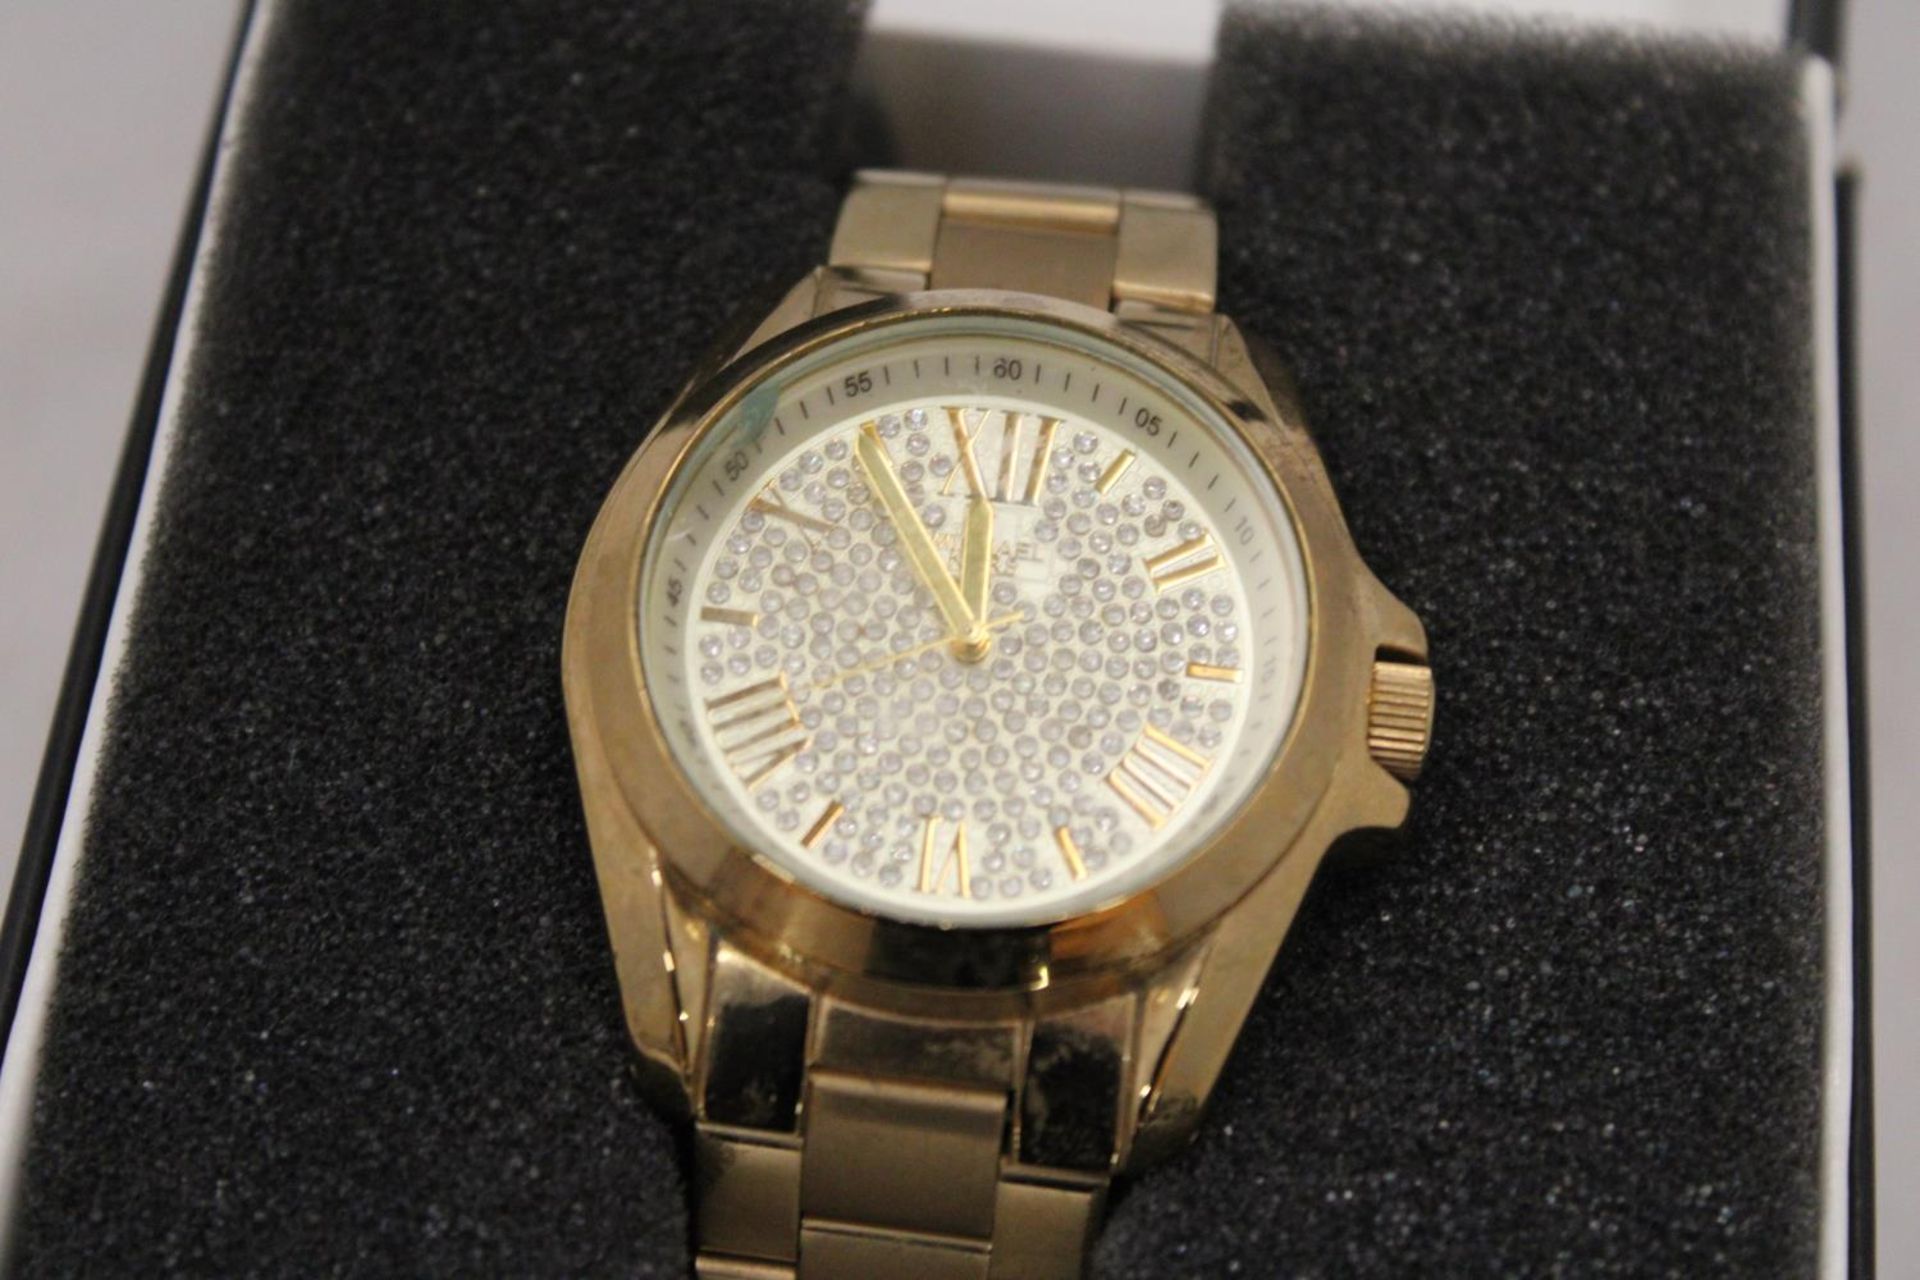 A MICHAEL KORS STYLE GOLD COLOURED WATCH IN PRESENTATION BOX - Image 2 of 5